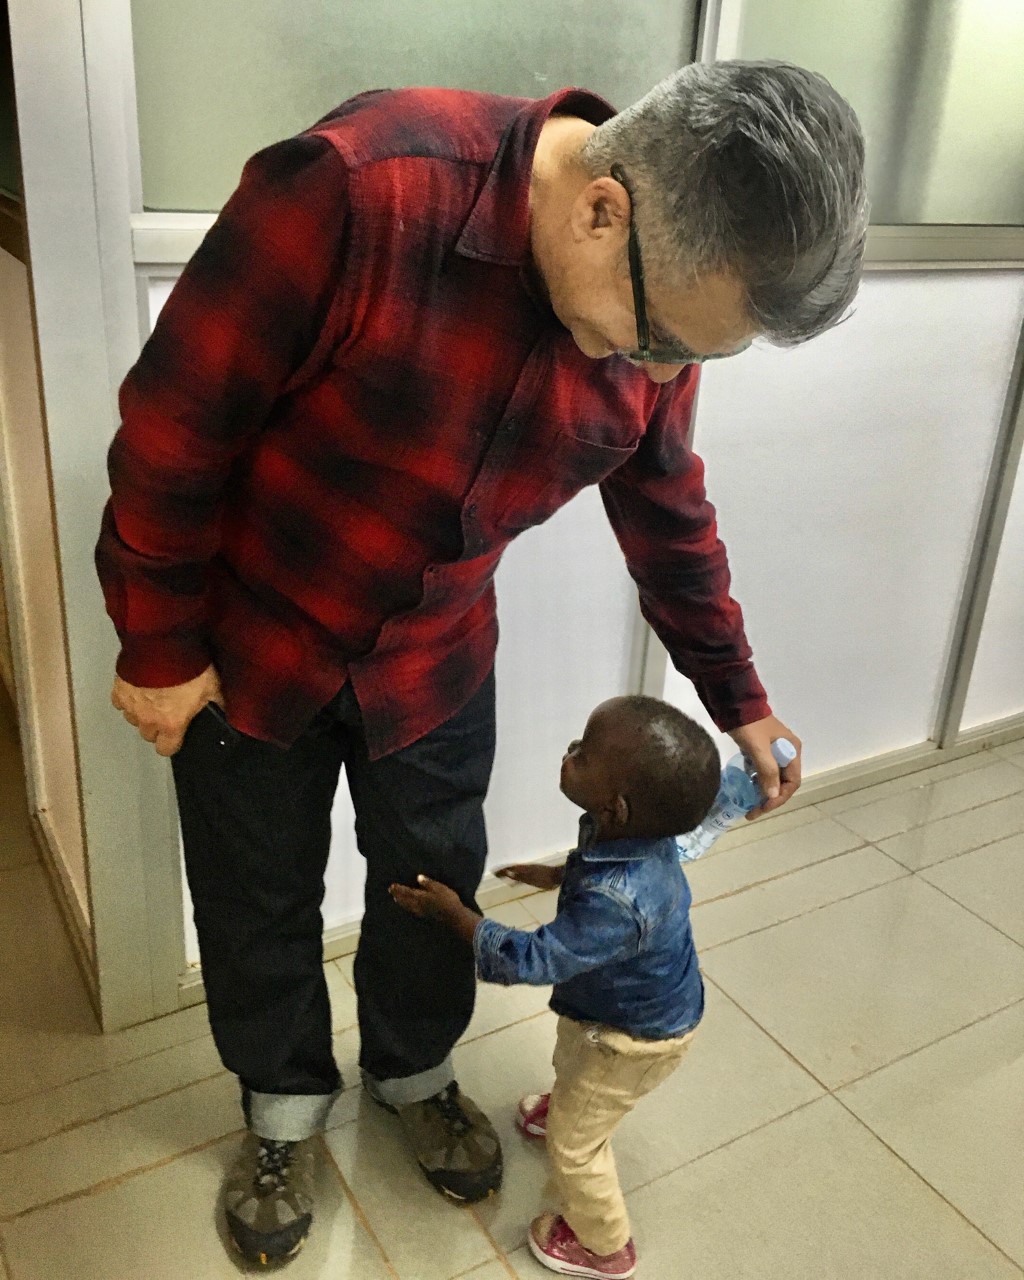 Joey Terrill in an AIDS Healthcare Foundation (AHF) clinic with a “beautiful affectionate child”, Kampala, Uganda, 2019.